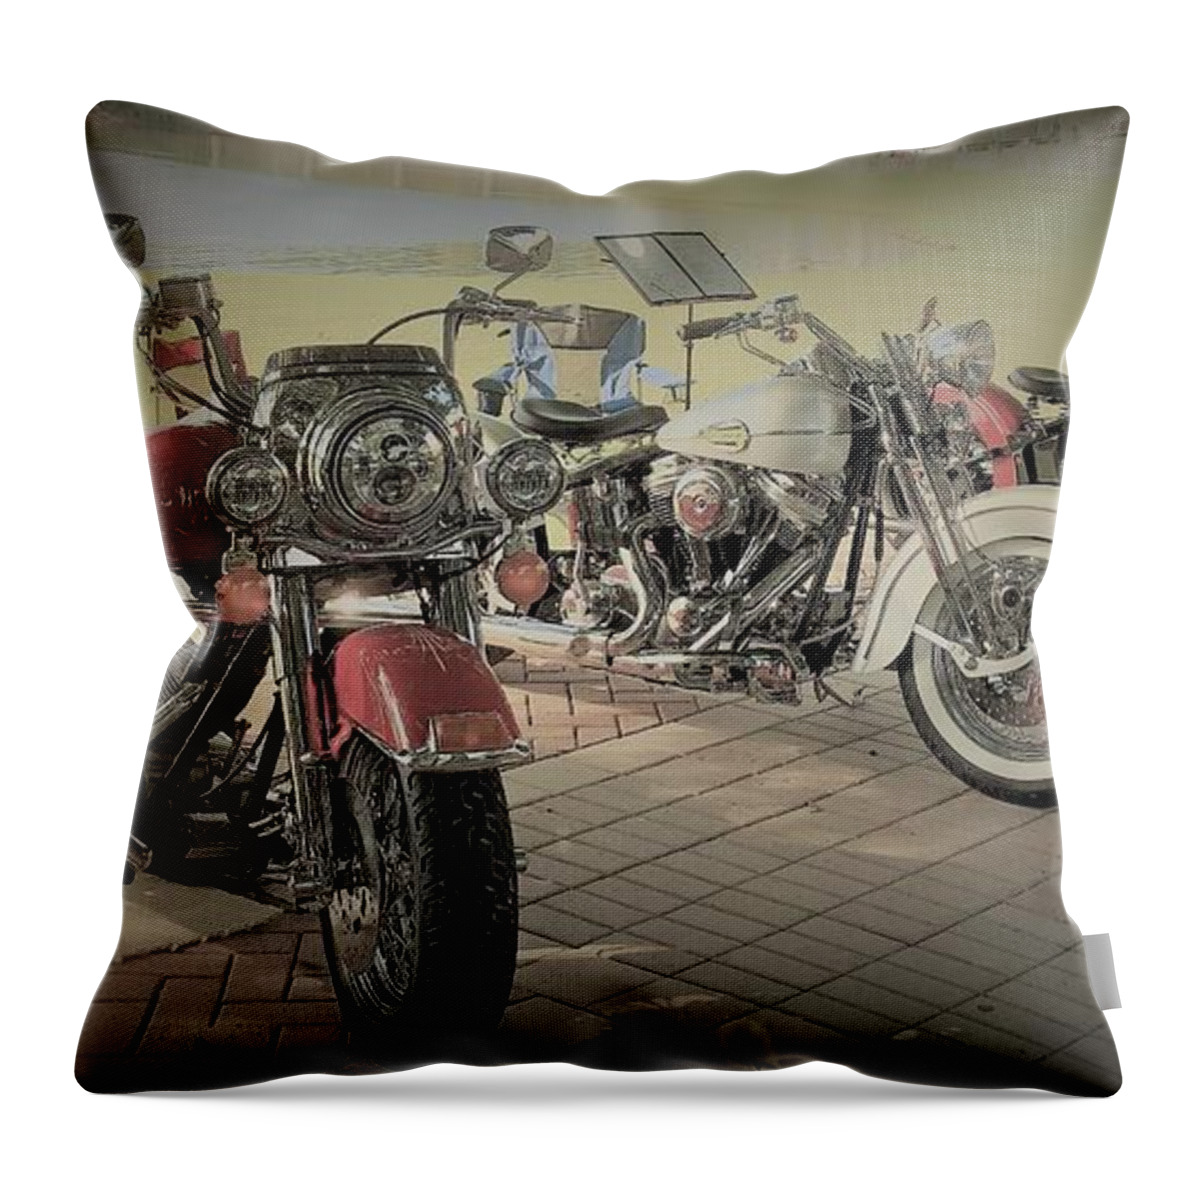 Harley Davidson St Augustine Florida Vintage John Anderson Throw Pillow featuring the photograph Concours d Elegance by John Anderson